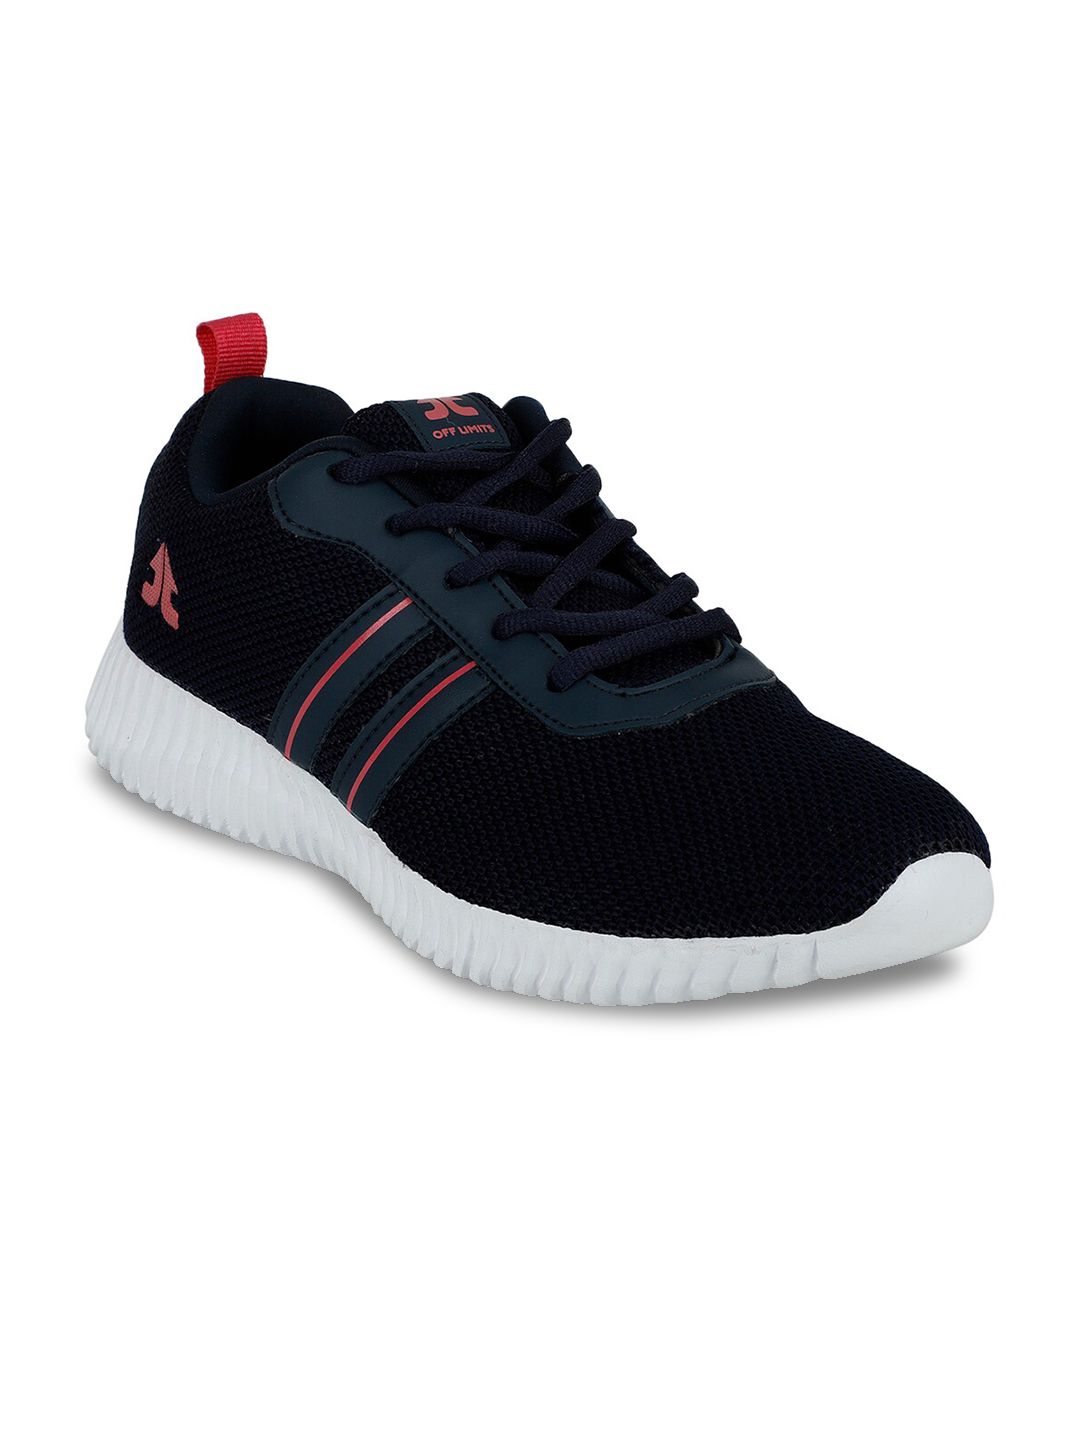 OFF LIMITS Women Navy Blue Running Shoes Price in India